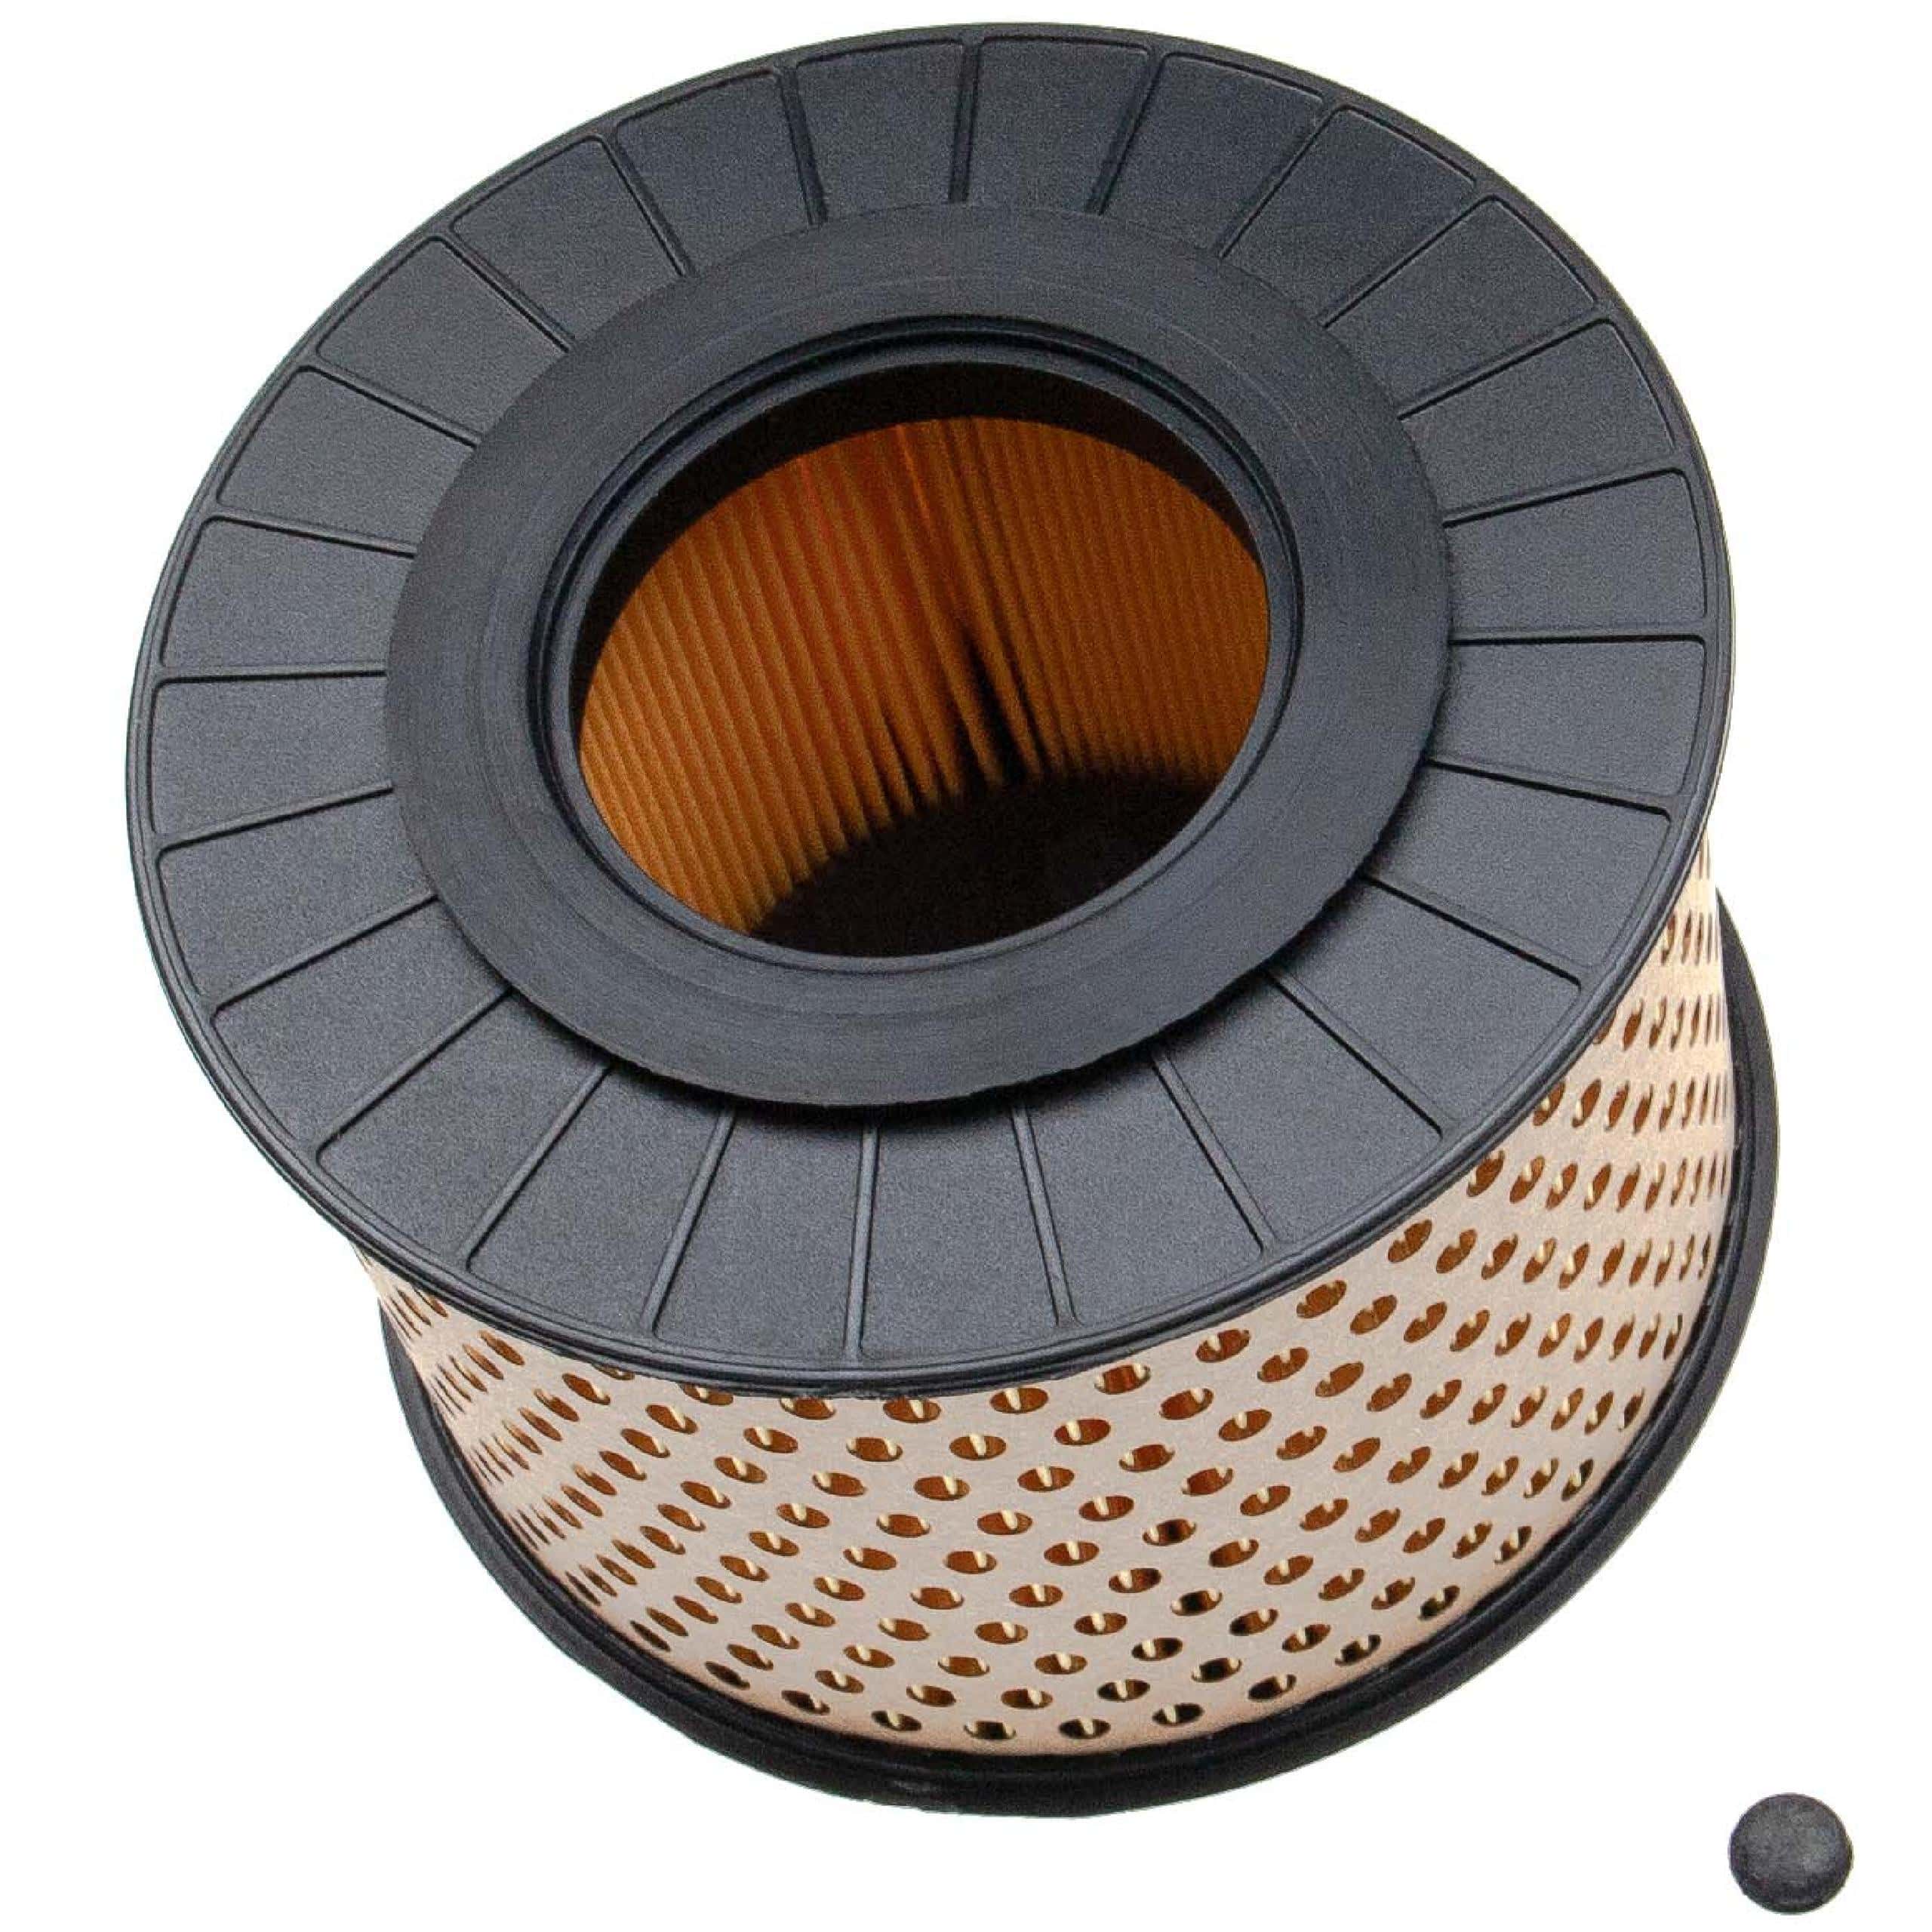 vhbw Filter replacement for Hatz 50426000, 504 260 00 for Vibratory Plate